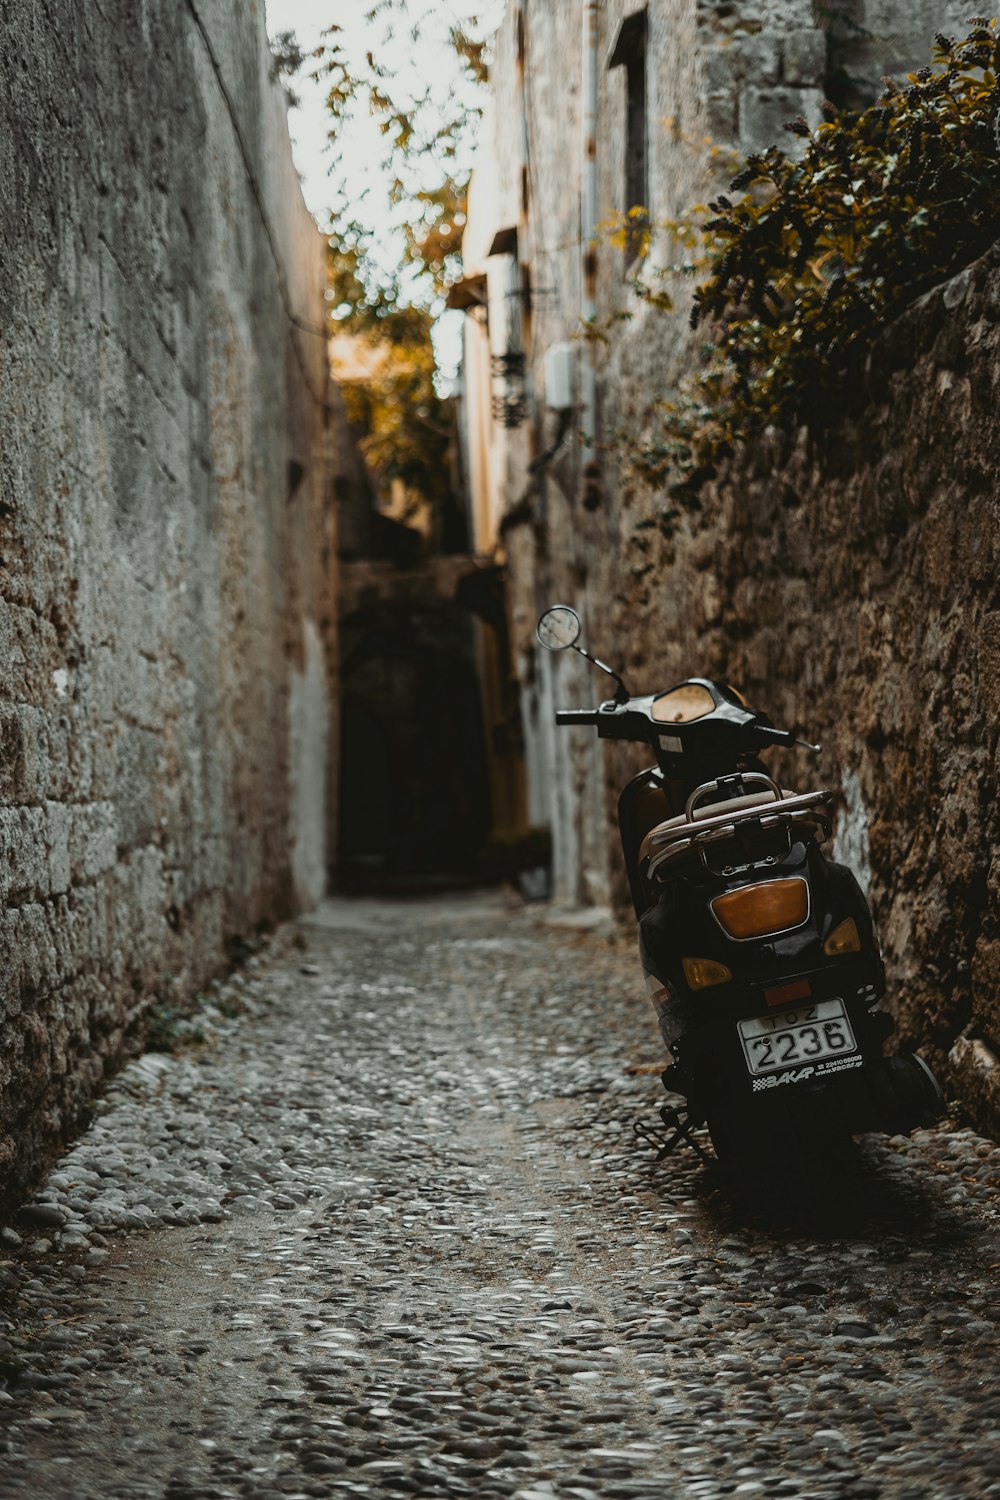 a motorcycle parked in an alley